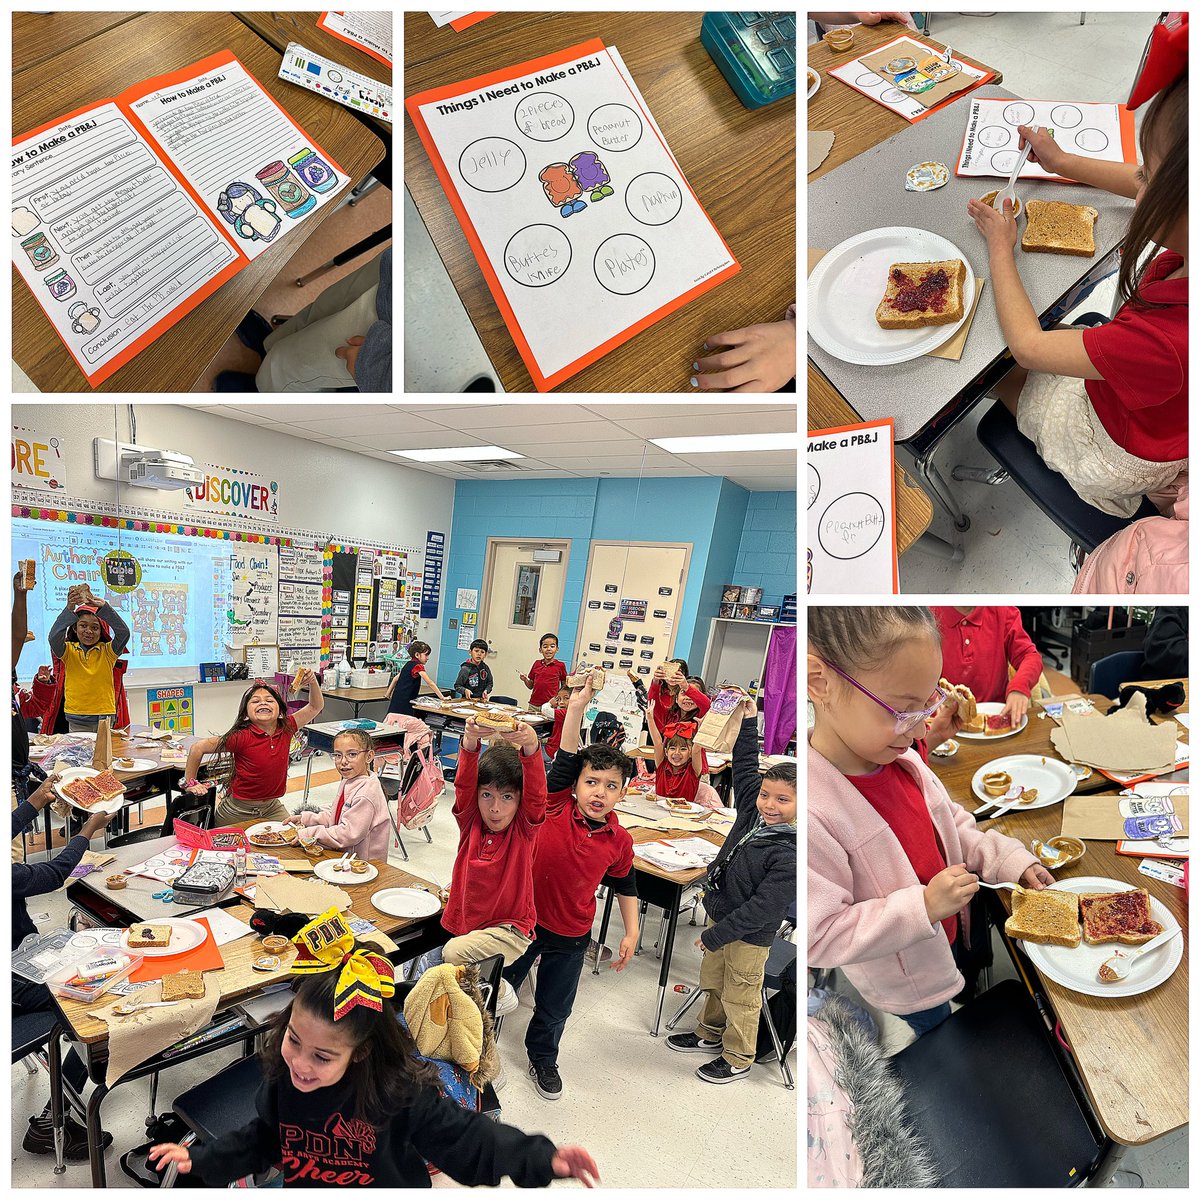 #proceduralwriting bringing it to life! They enjoyed sharing their writing and making a PB&J @PDN_Academy @lwaters_PDN @MSmith_PDNFAA